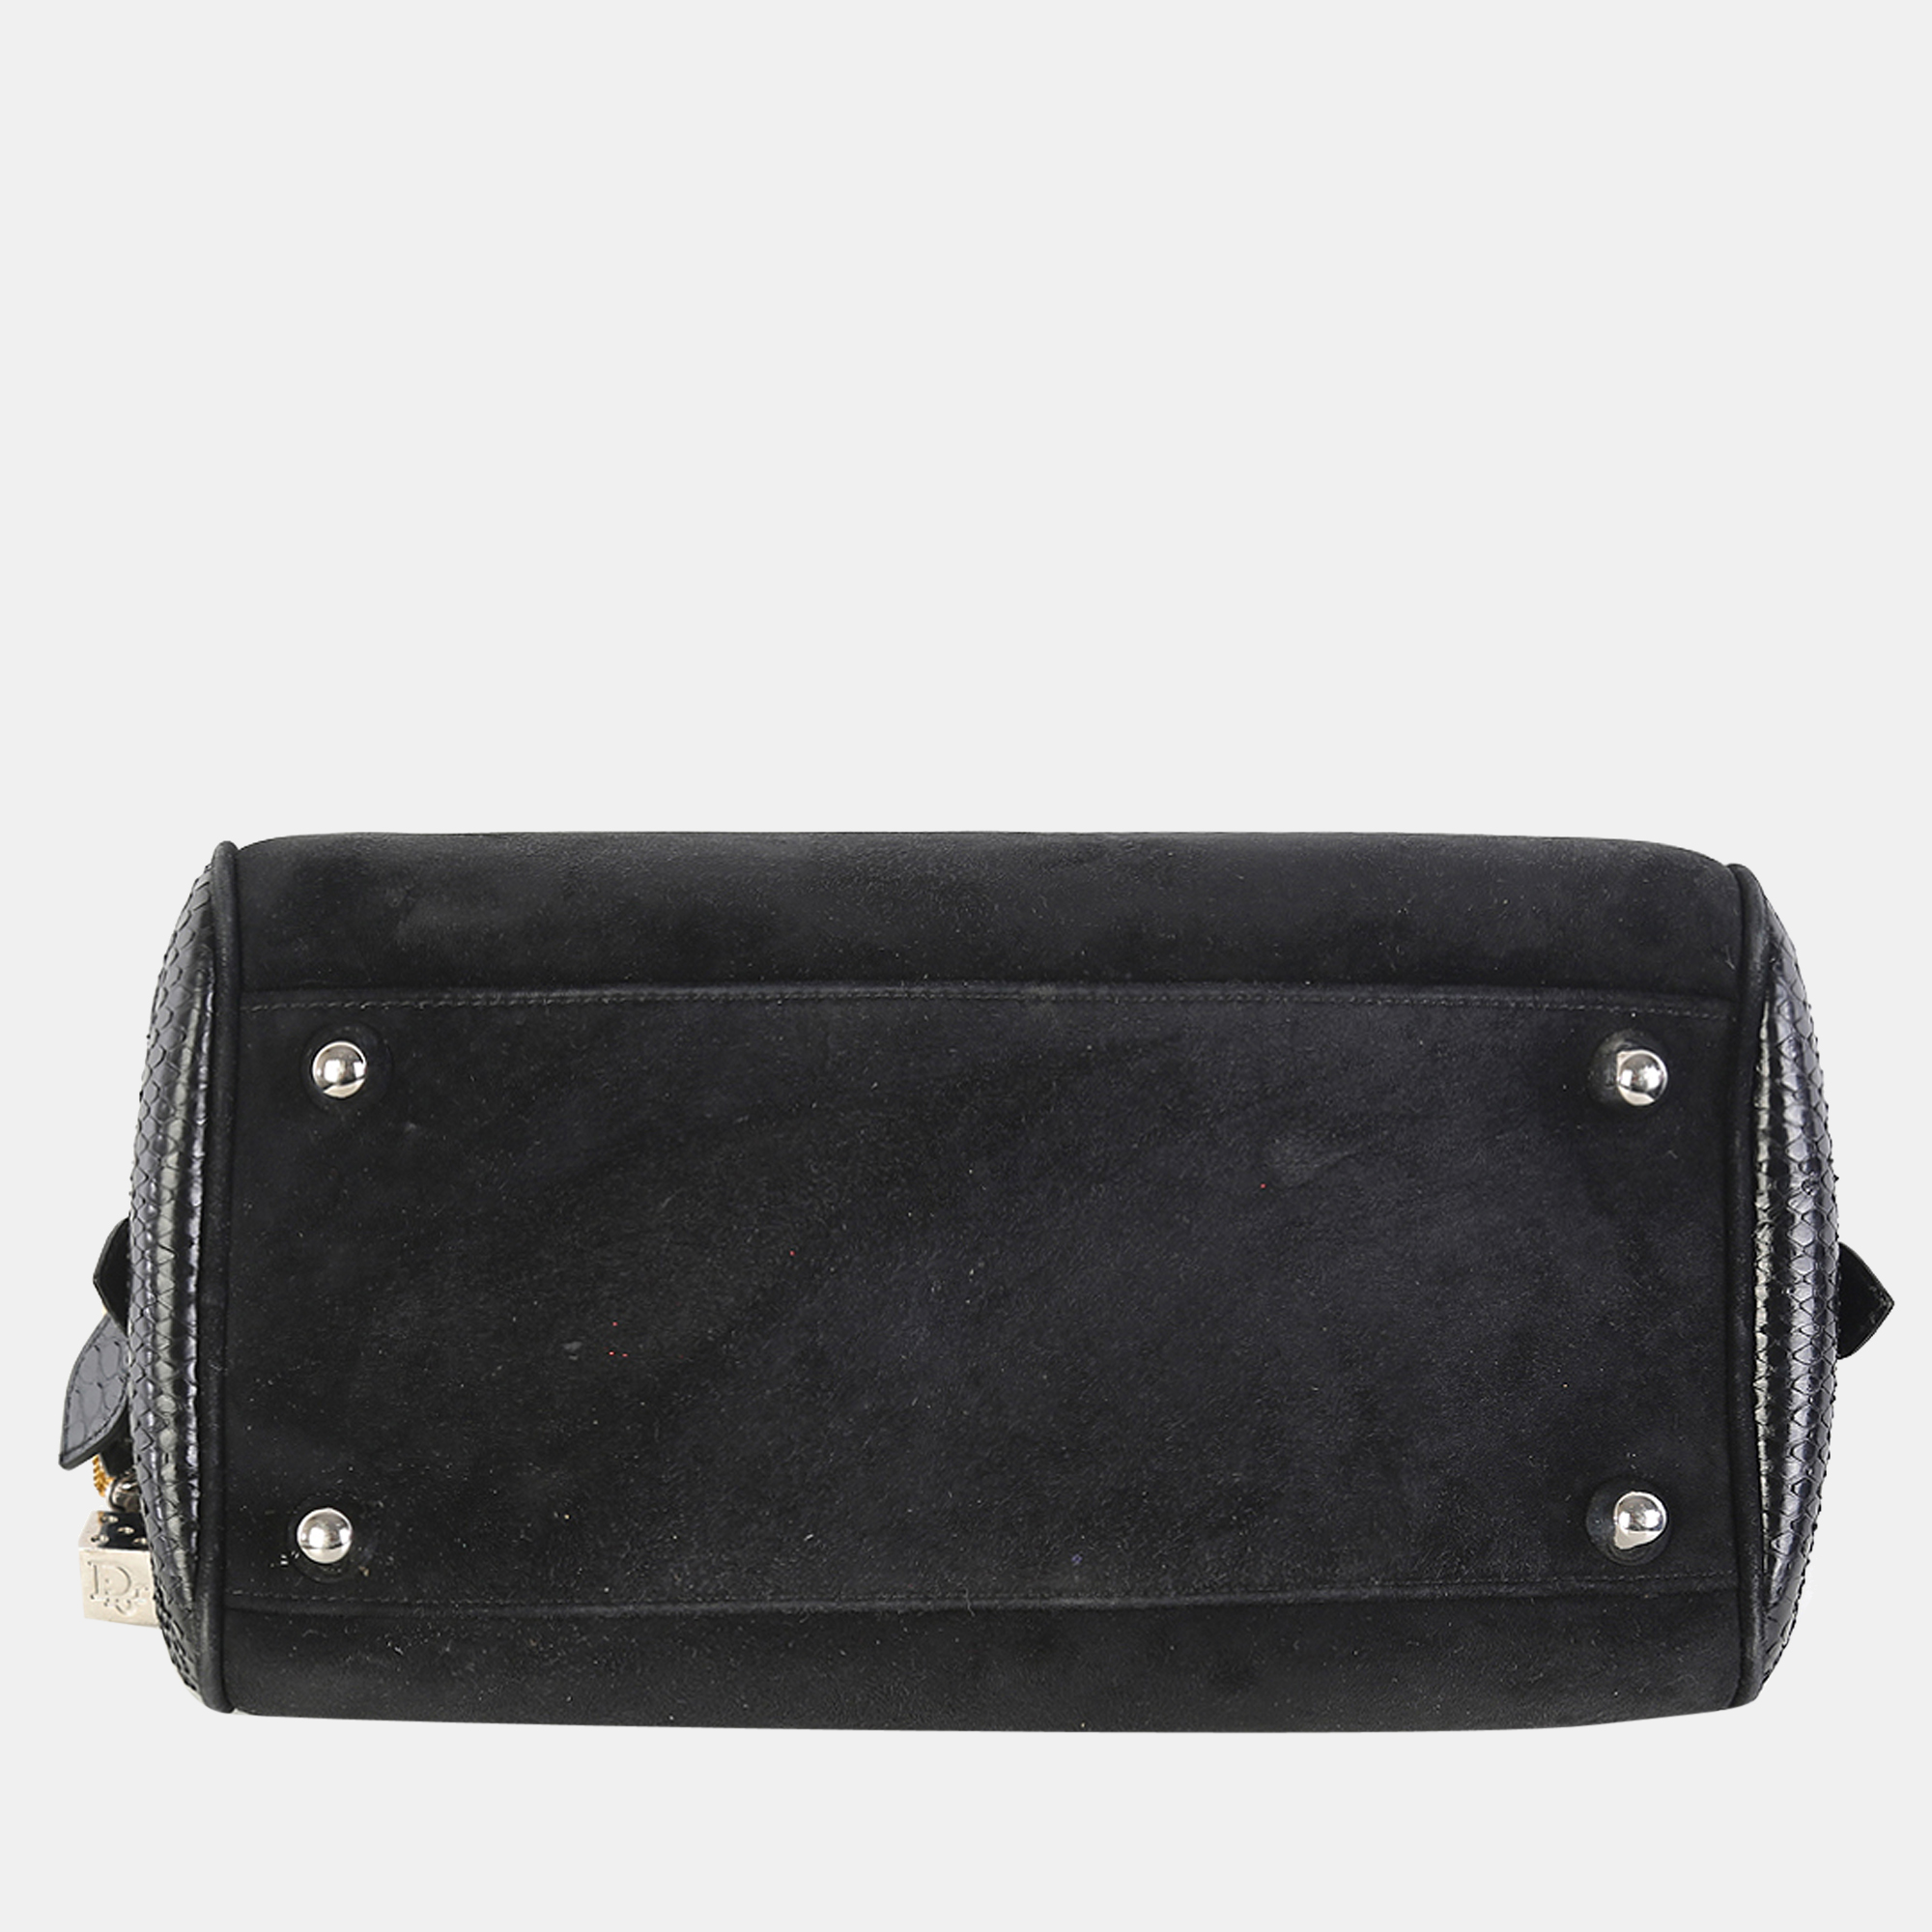 Christian Dior Black Suede And Leather Gambler Bag